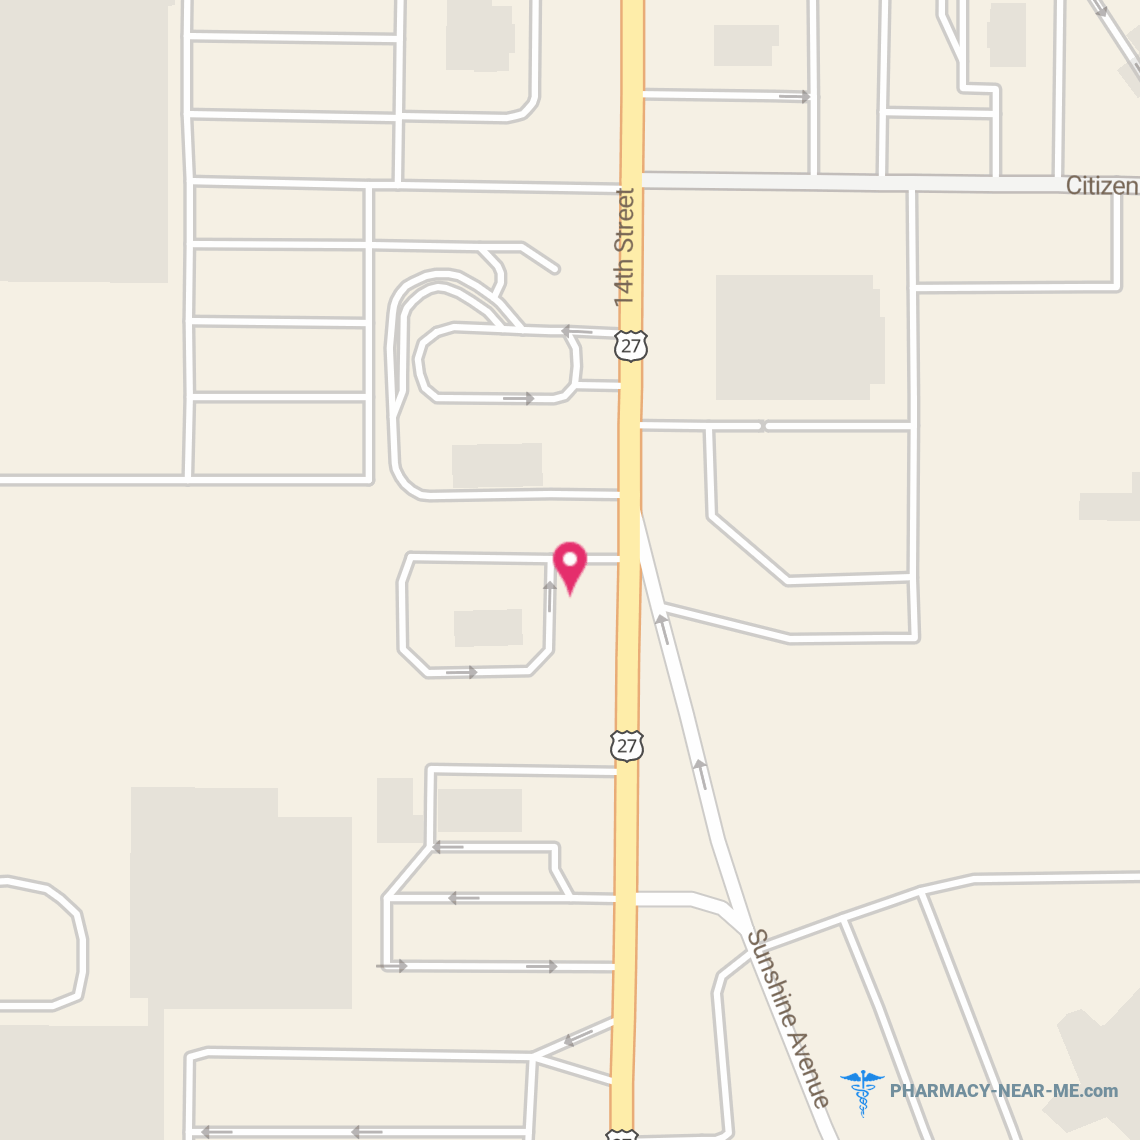 WALGREENS #06940 - Pharmacy Hours, Phone, Reviews & Information: 901 South 14th St, Leesburg, Florida 34748, United States